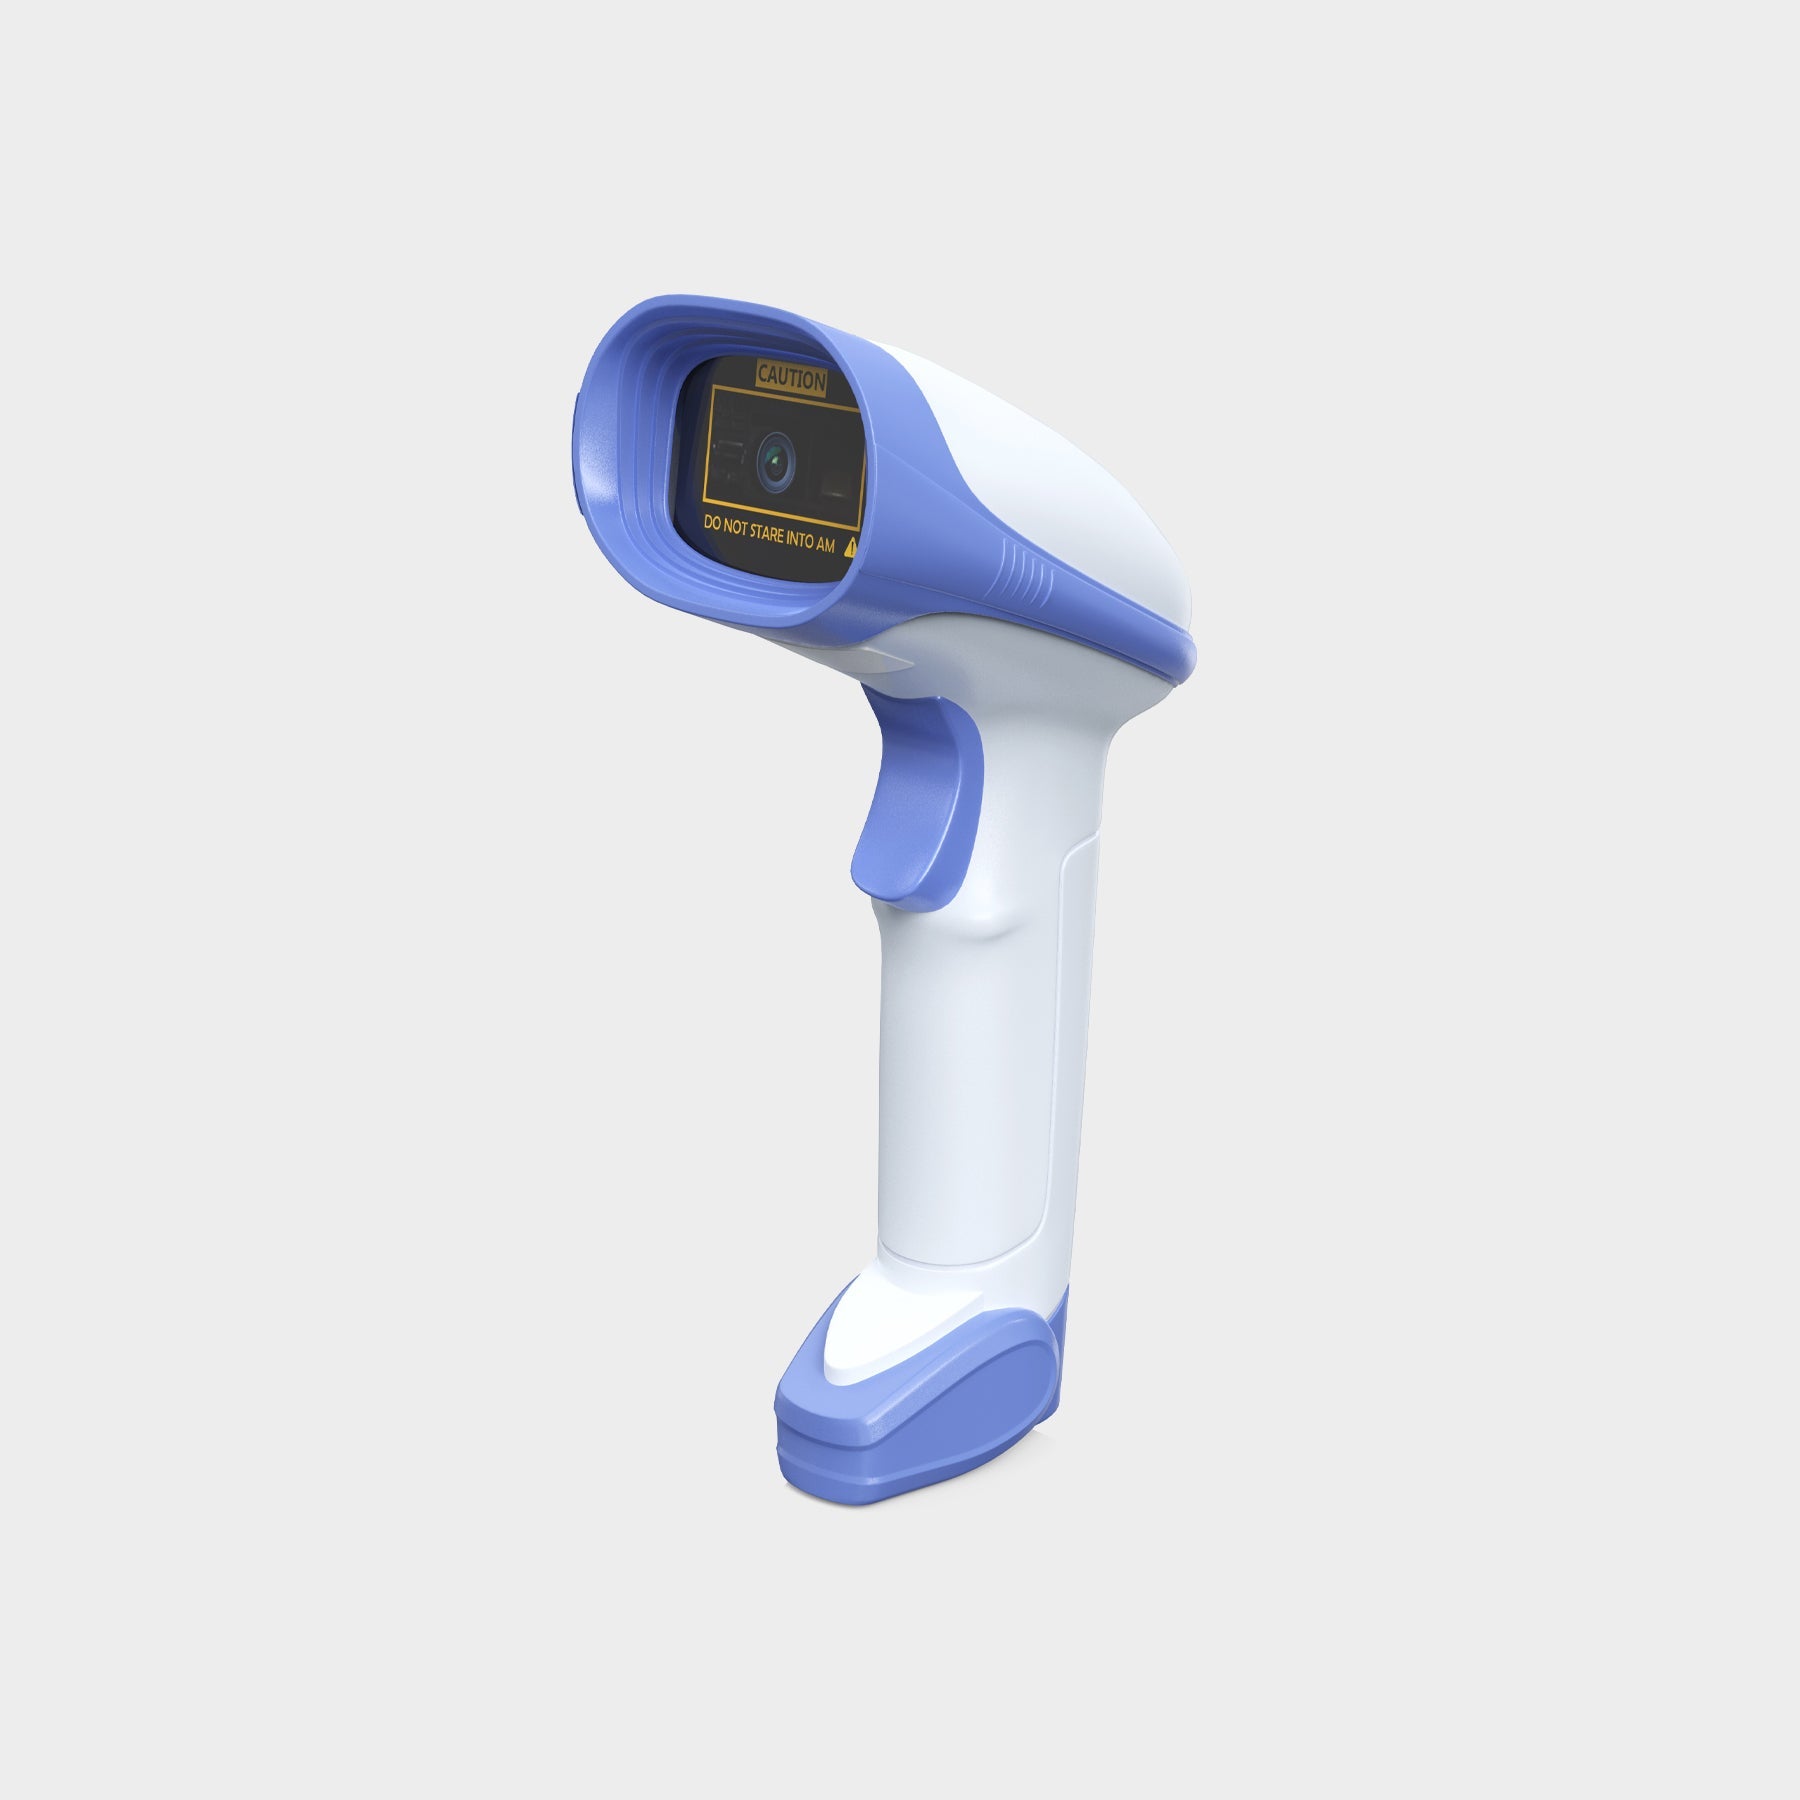 AMBIR BR200 Wireless Barcode Scanner with 2.4Ghz with Wireless USB Dongle - White/Blue for Compulink (CBR200-WH)